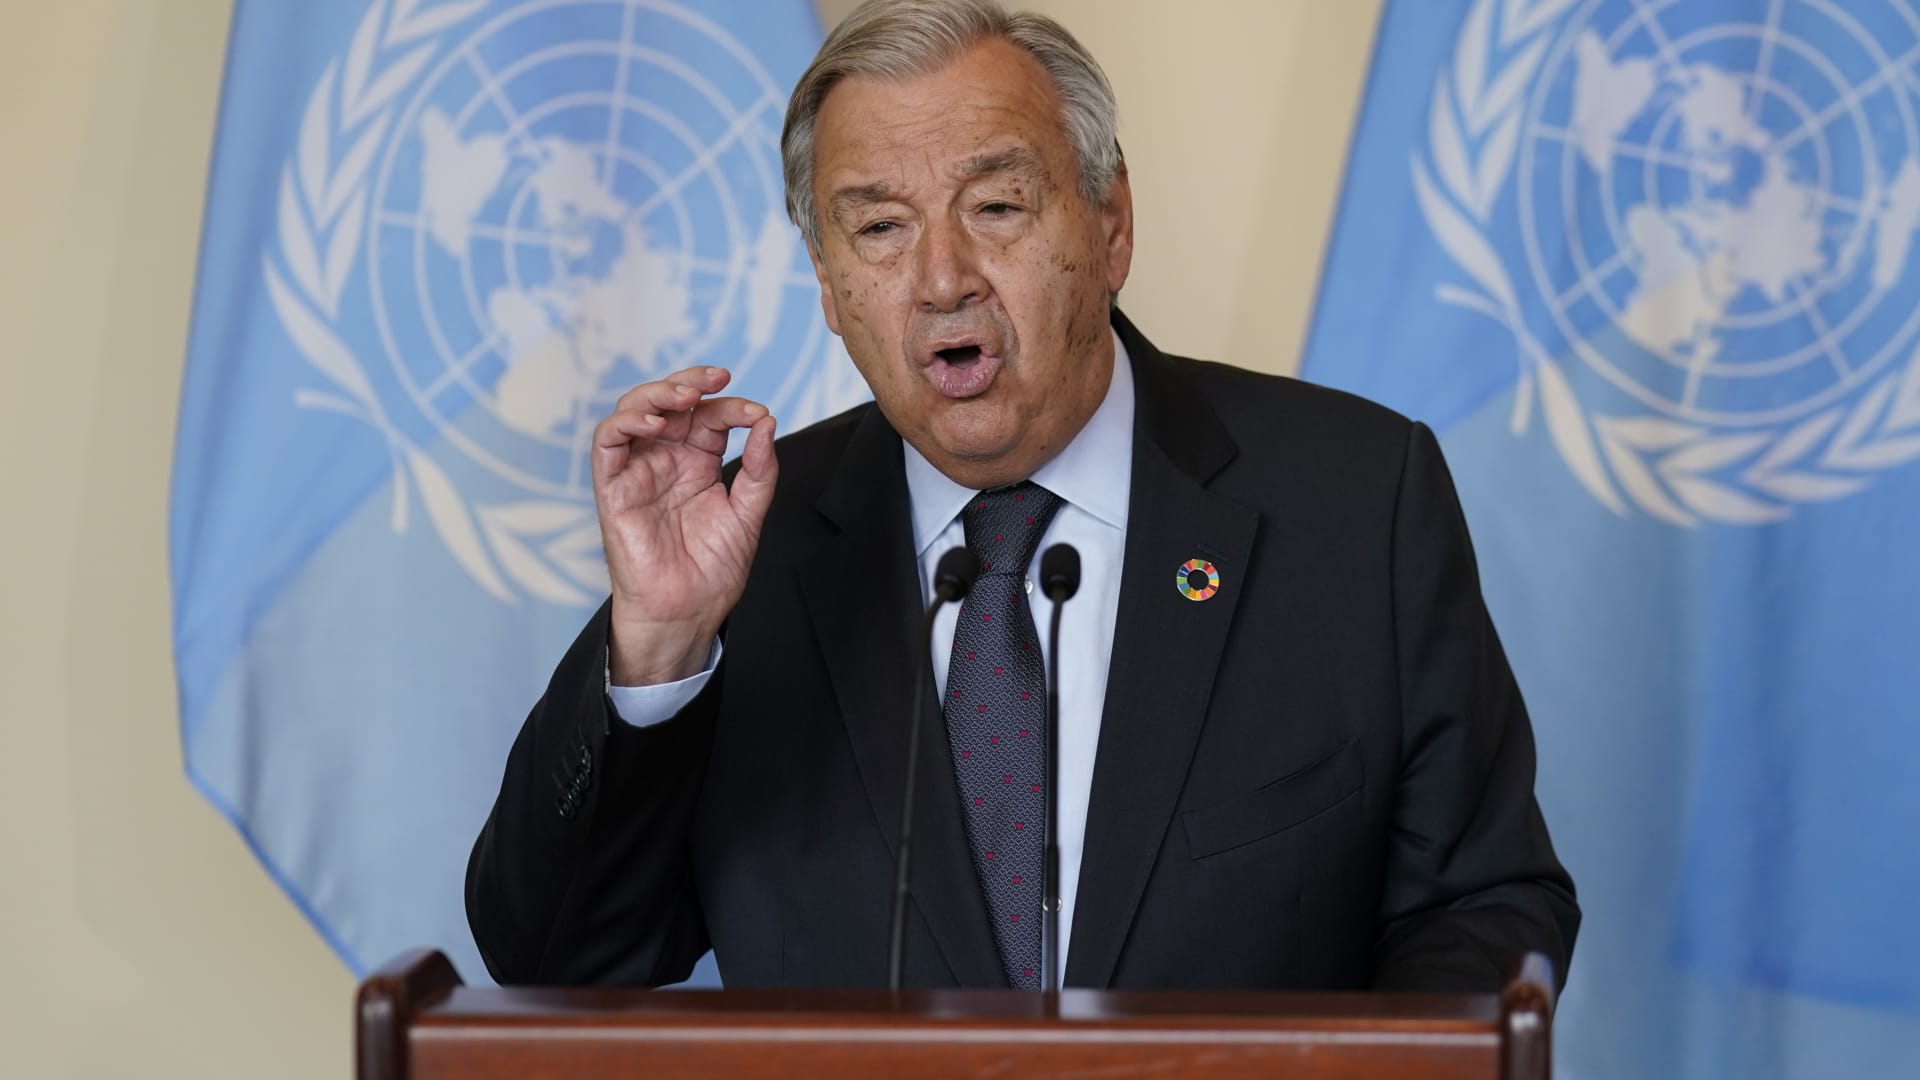 UN’s Guterres says ‘polluters have to pay’, calls for tax on fossil fuels